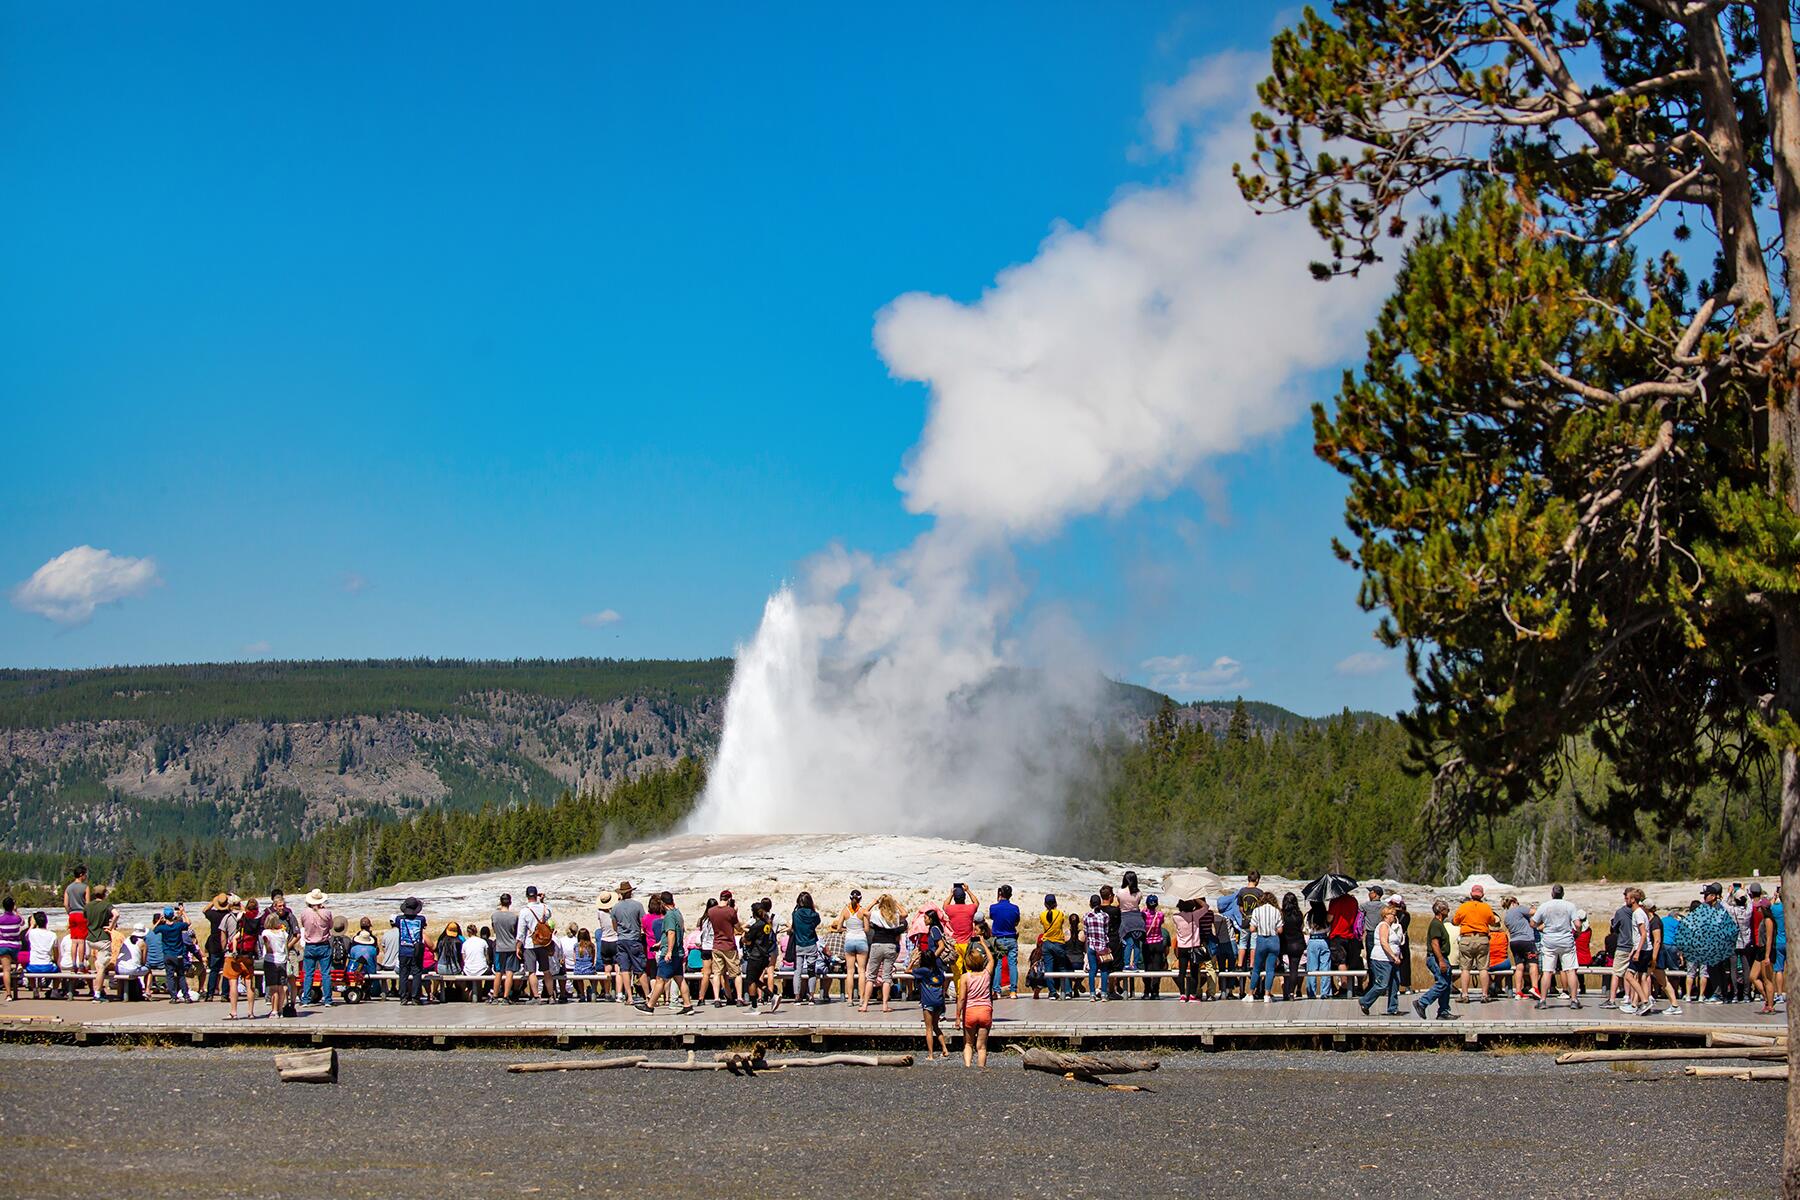 <a href='https://www.fodors.com/world/north-america/usa/wyoming/experiences/news/photos/whats-better-yellowstone-national-park-or-wind-river-region#'>From &quot;What's Better: Yellowstone National Park or Wind River?: Yellowstone vs. Wind River: Crowds&quot;</a>